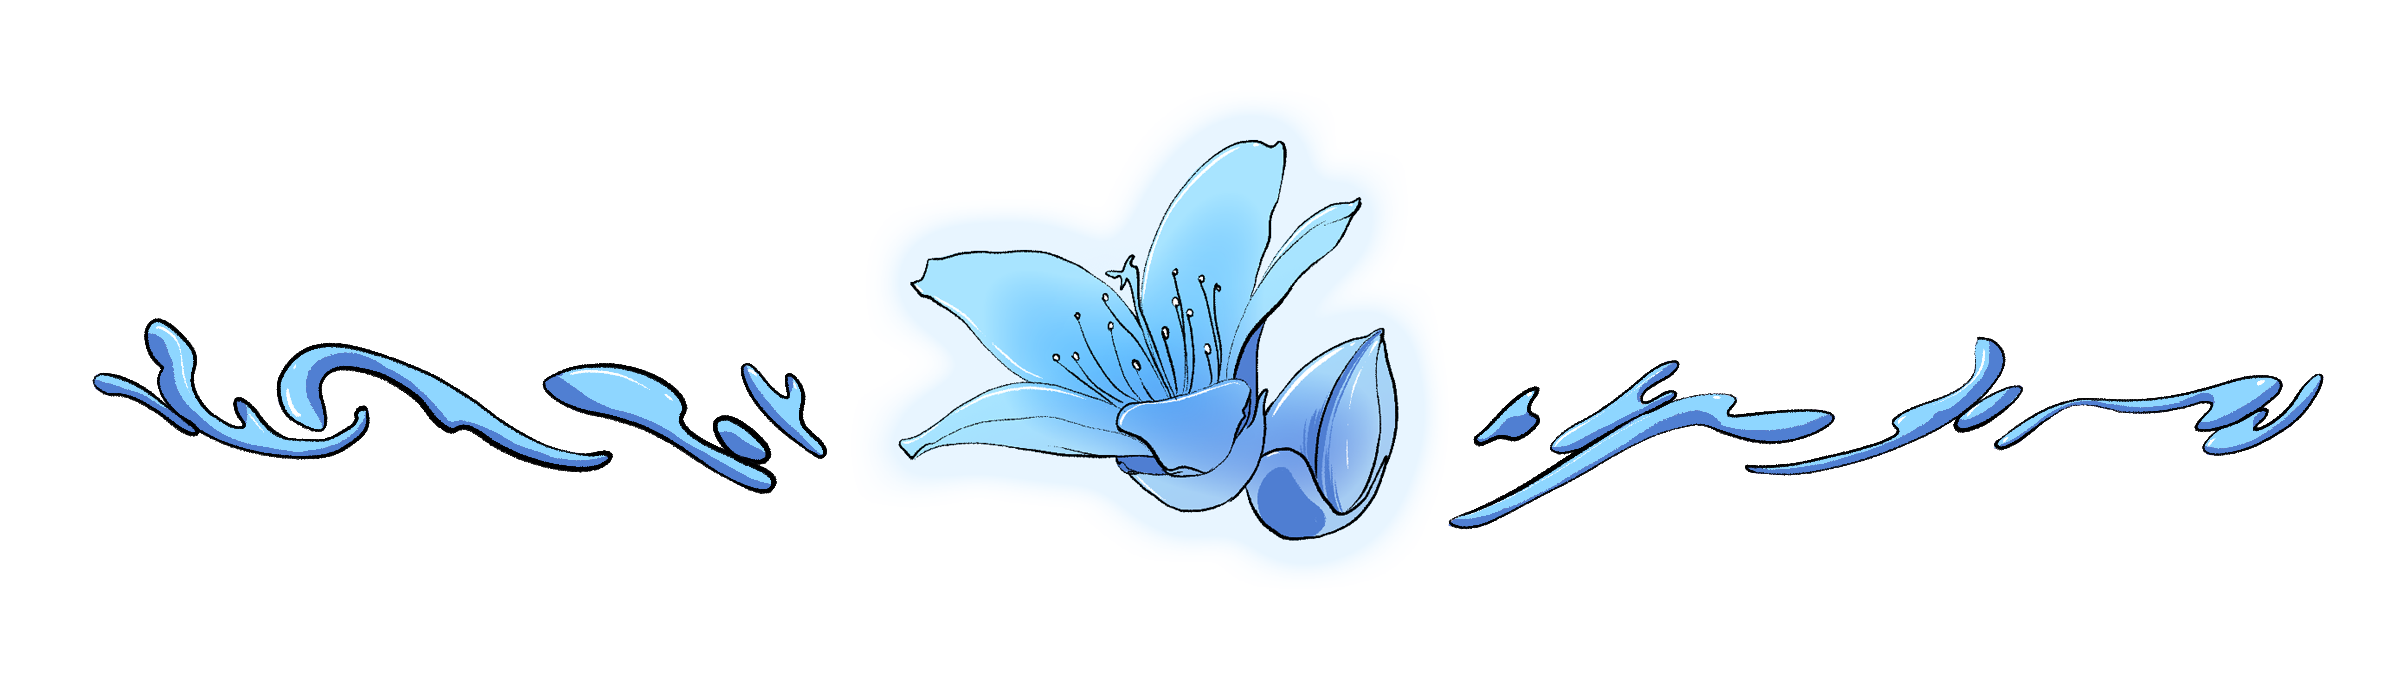 Illustration of bioluminescent flower used to divide story text